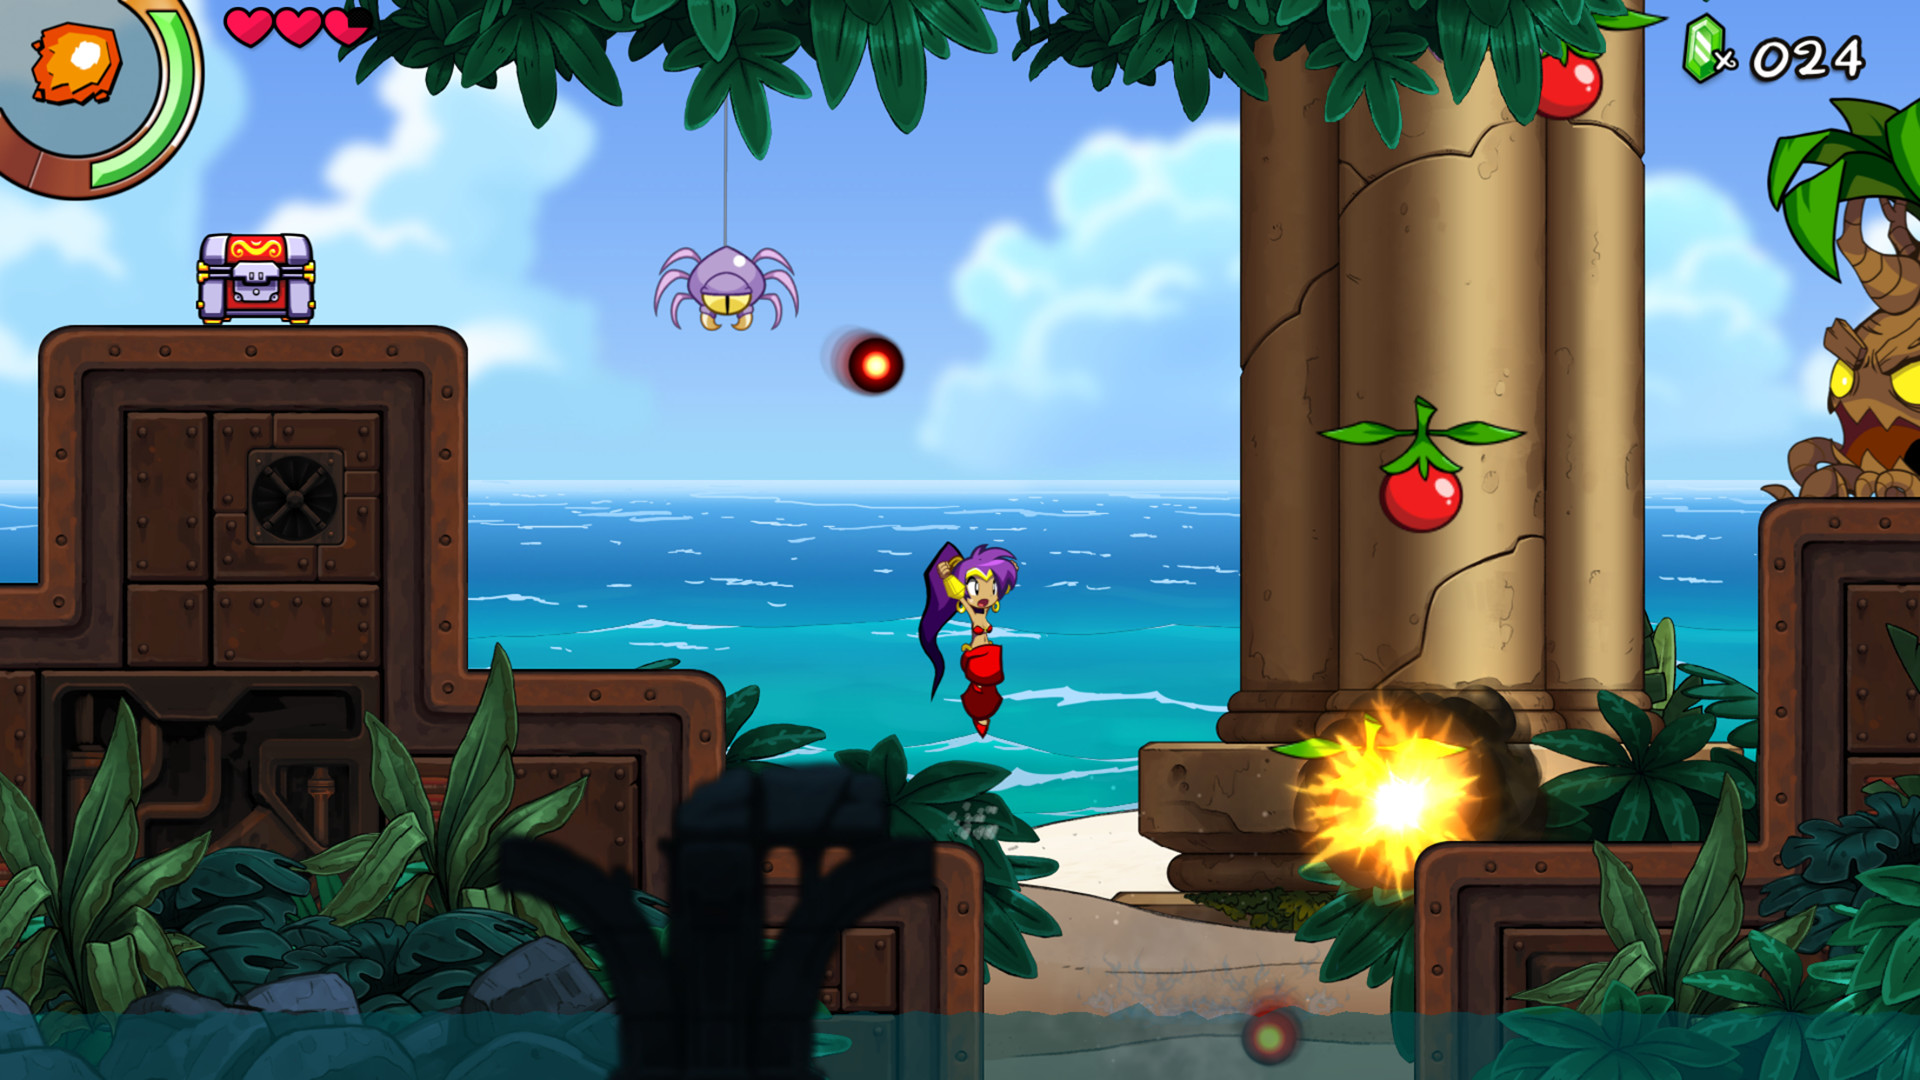 Review: Shantae and the Seven Sirens (Nintendo Switch)